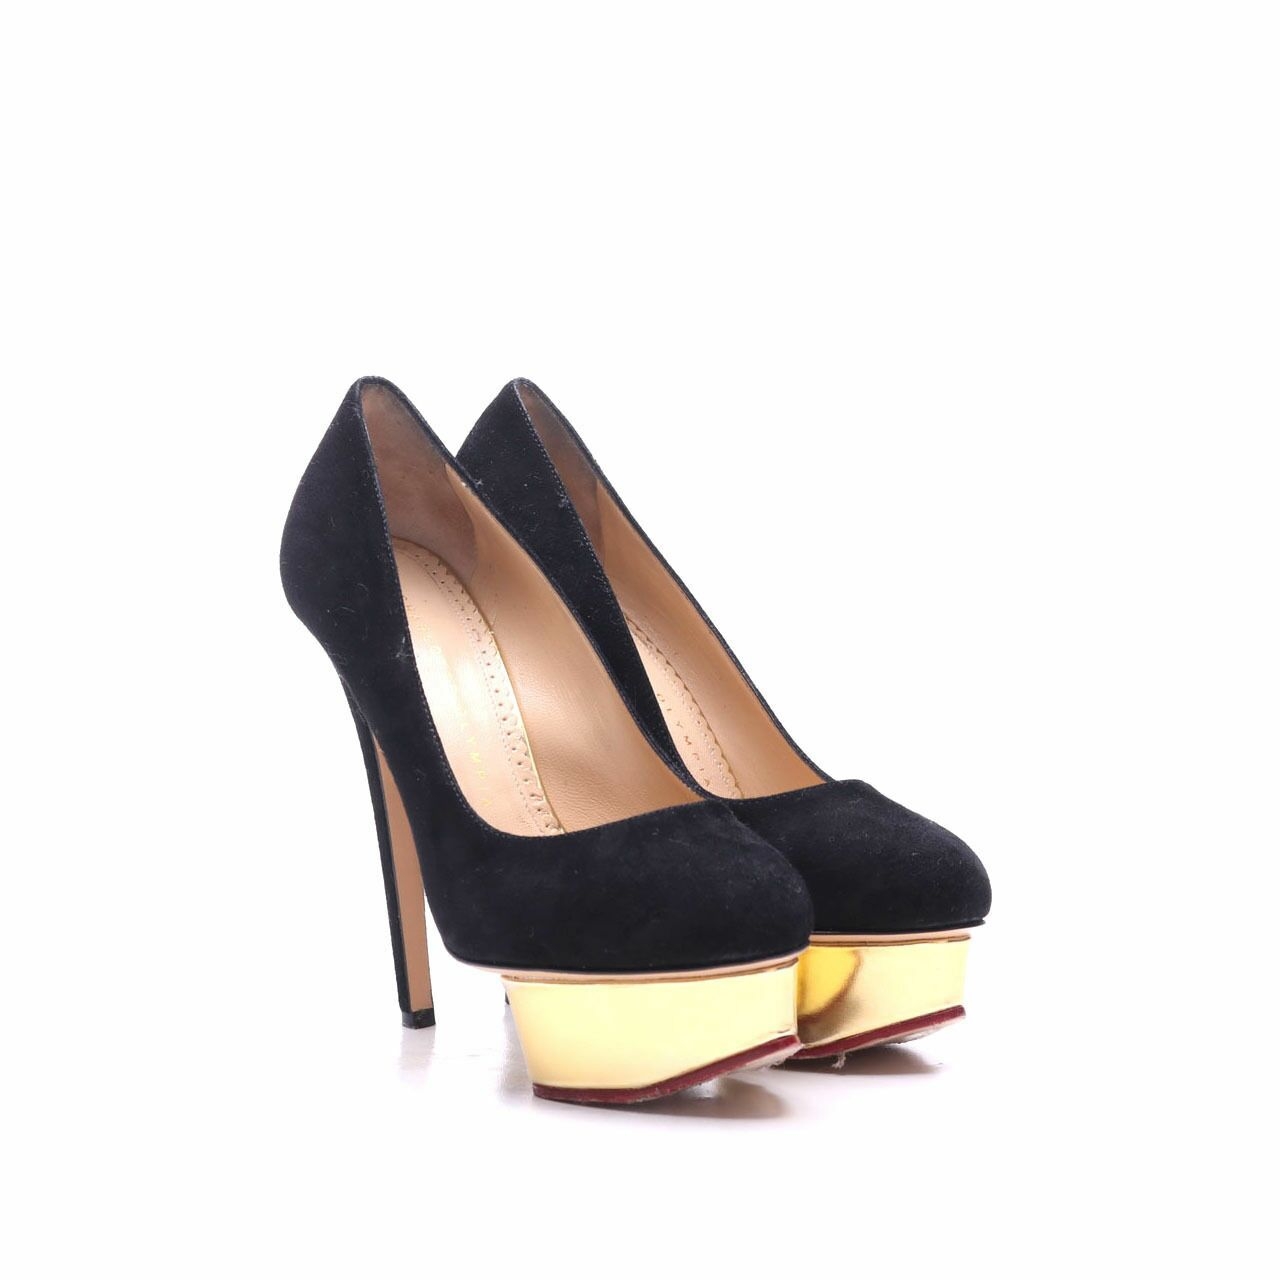 Charlotte Olympia Suede Dolly Black Heels